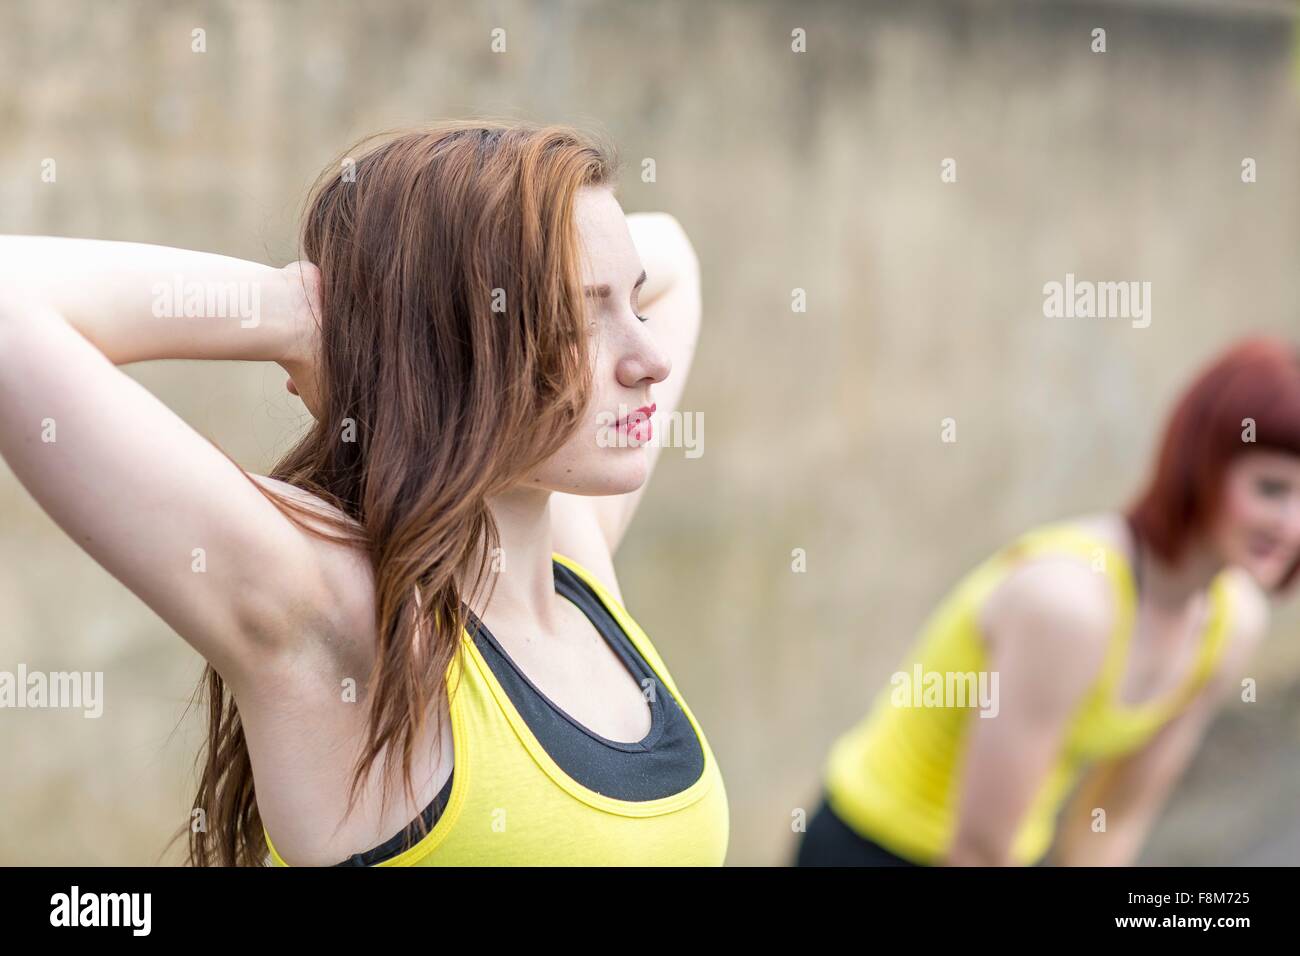 Young women stretching outdoors Stock Photo